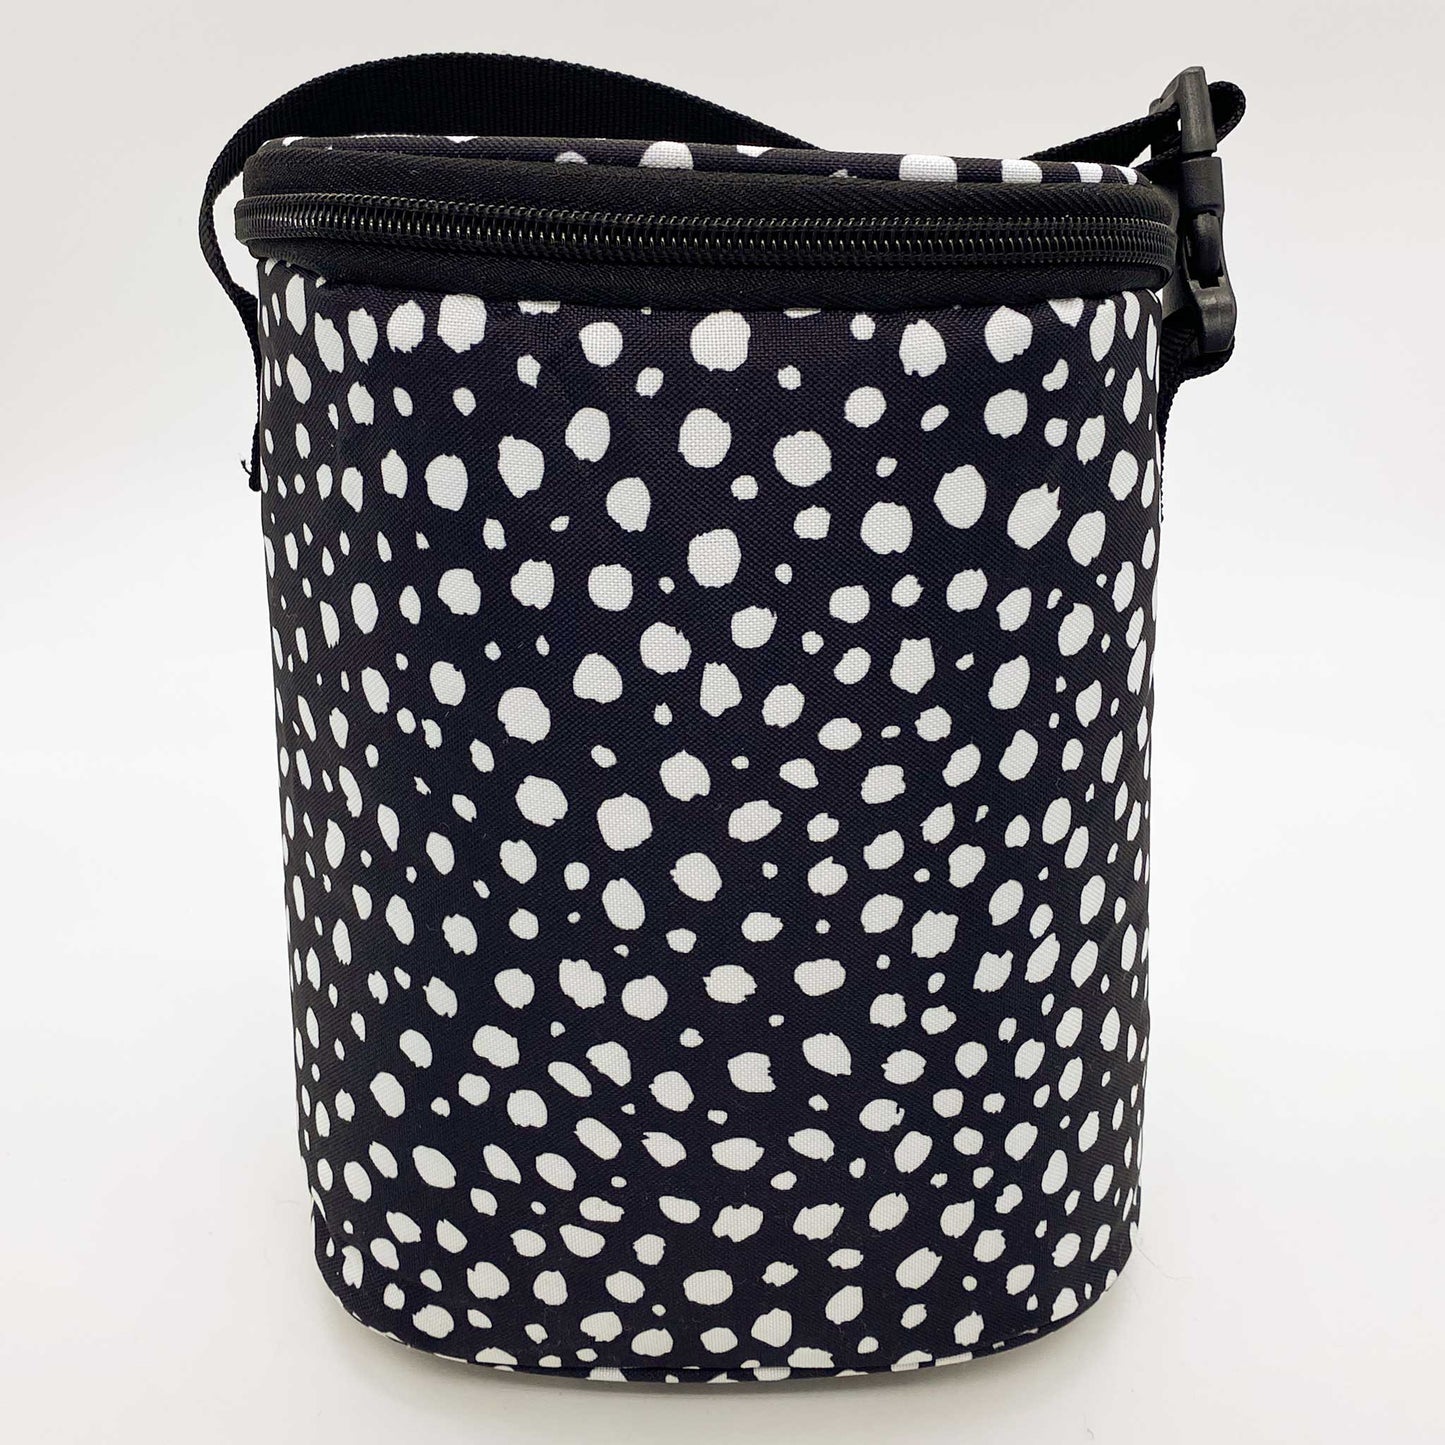 Insulated Baby Bottle and Lunch Bag - Black Spotty